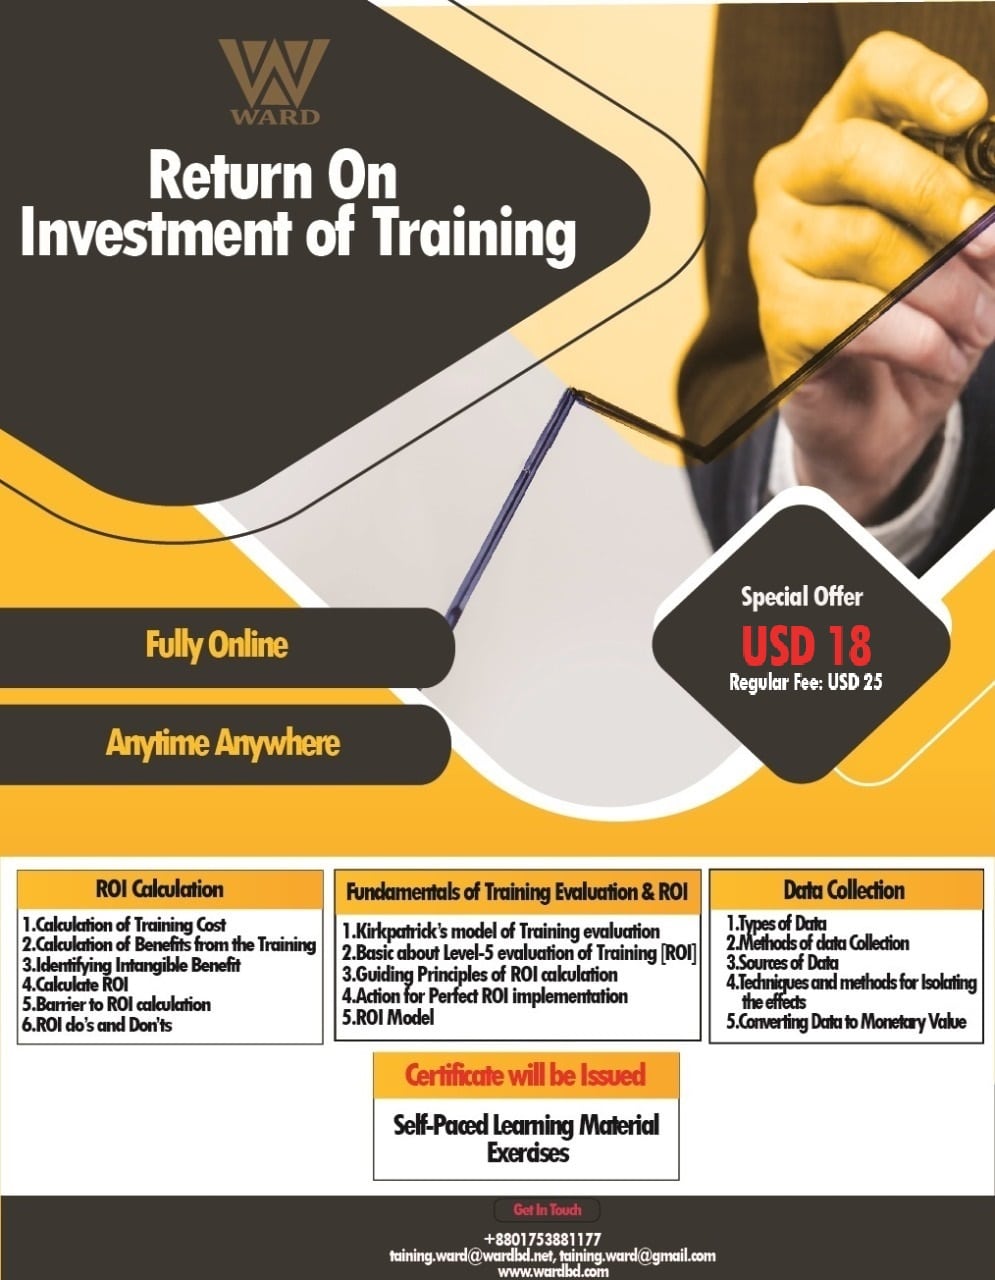 Return On Investment of Training: Tools & Techniques